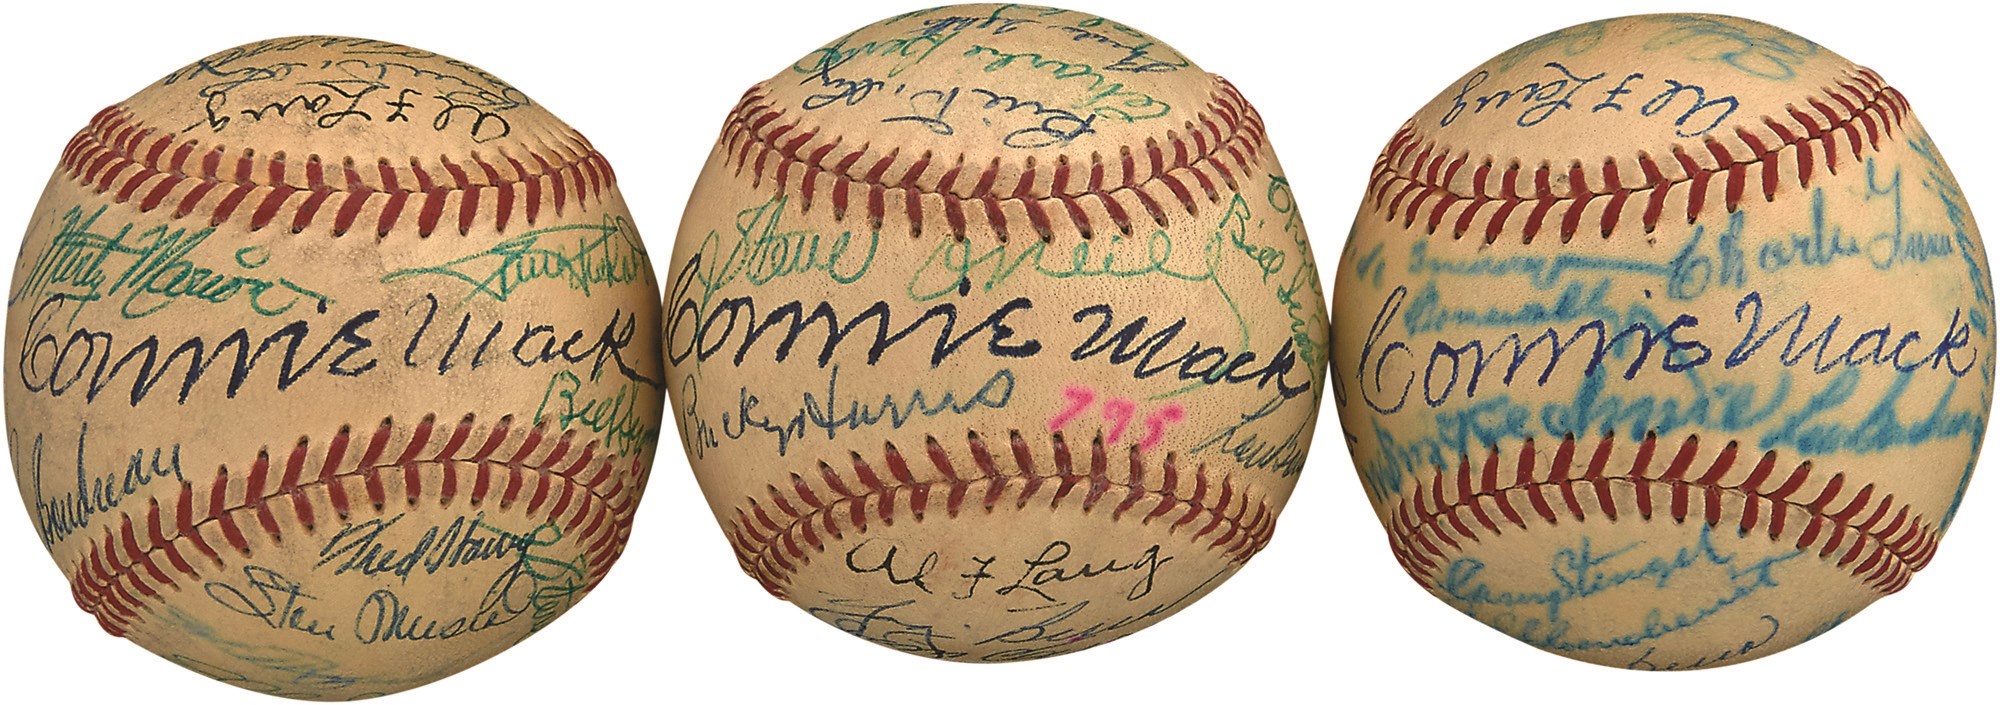 - Amazing 1950s Hall of Famers & Team-Signed Baseballs w/Jimmie Foxx & Connie Mack (3) (PSA)